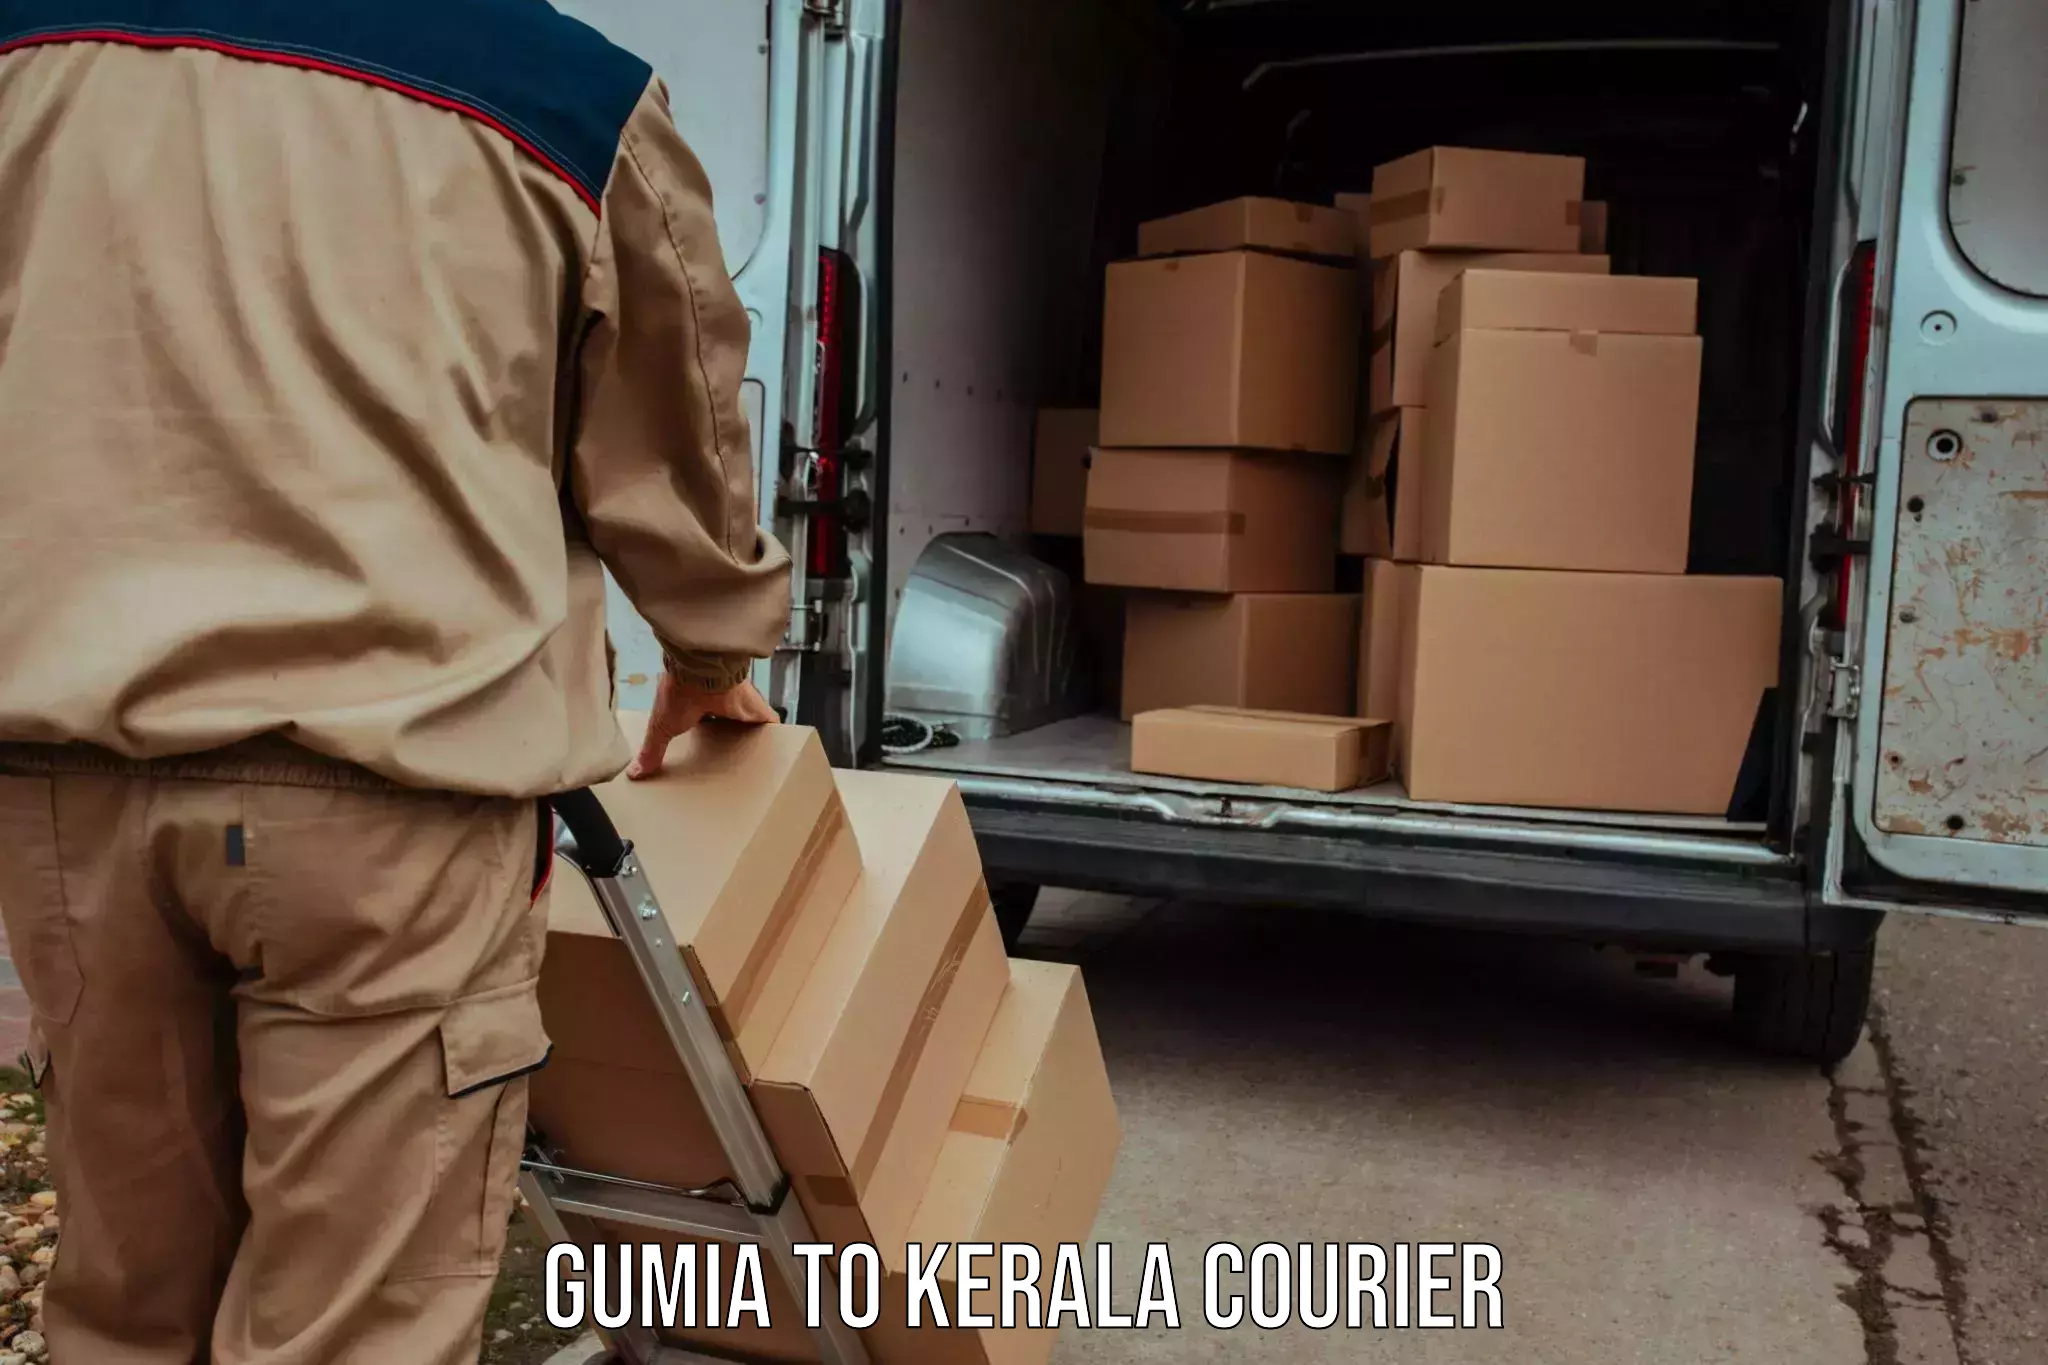 End-to-end delivery Gumia to Kerala